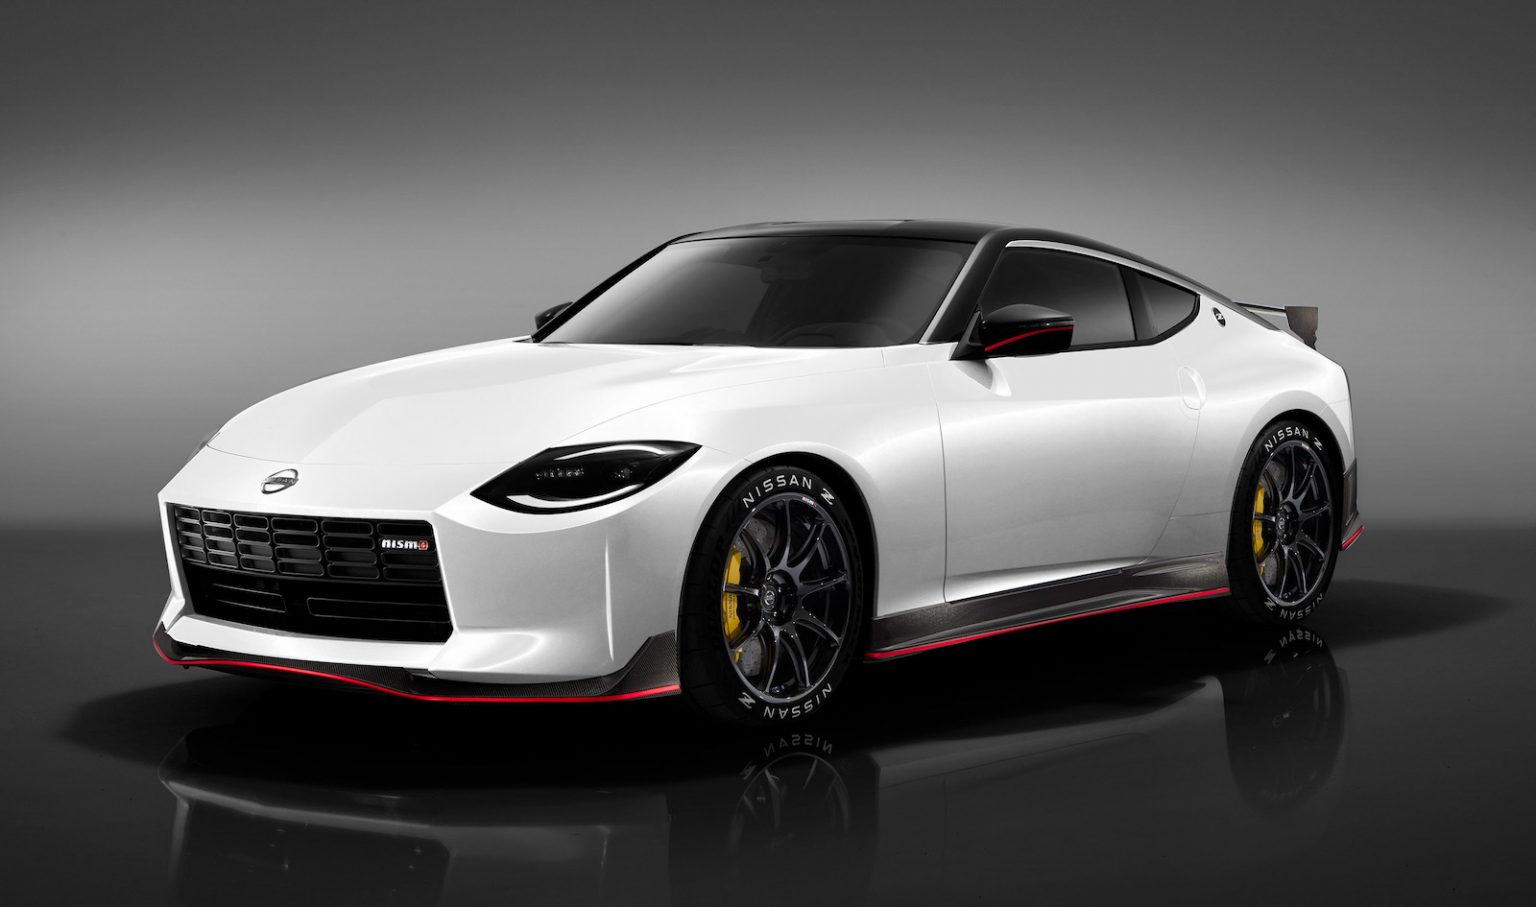 2022 Nissan Z Nismo performance version to debut in January rumour